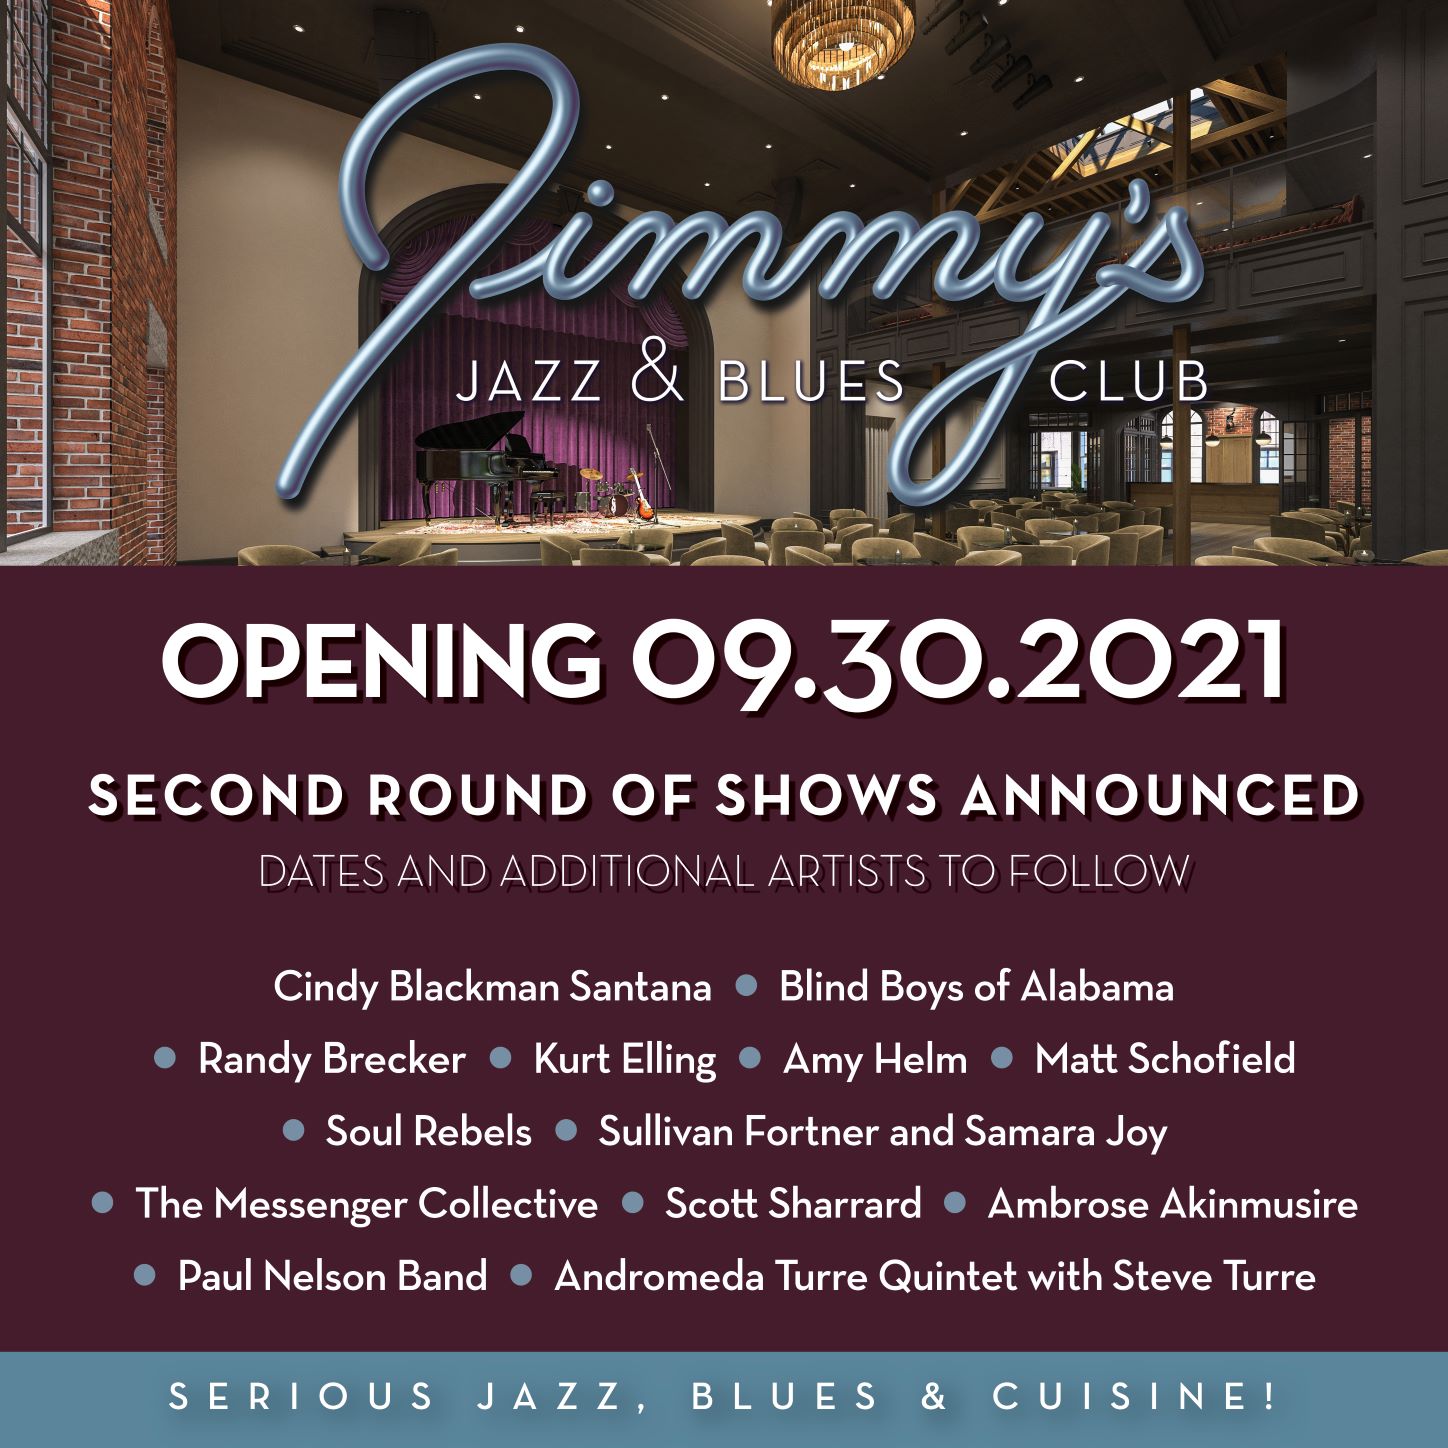 Jimmy's Jazz & Blues Club Second Round of 2021 Fall Schedule Shows